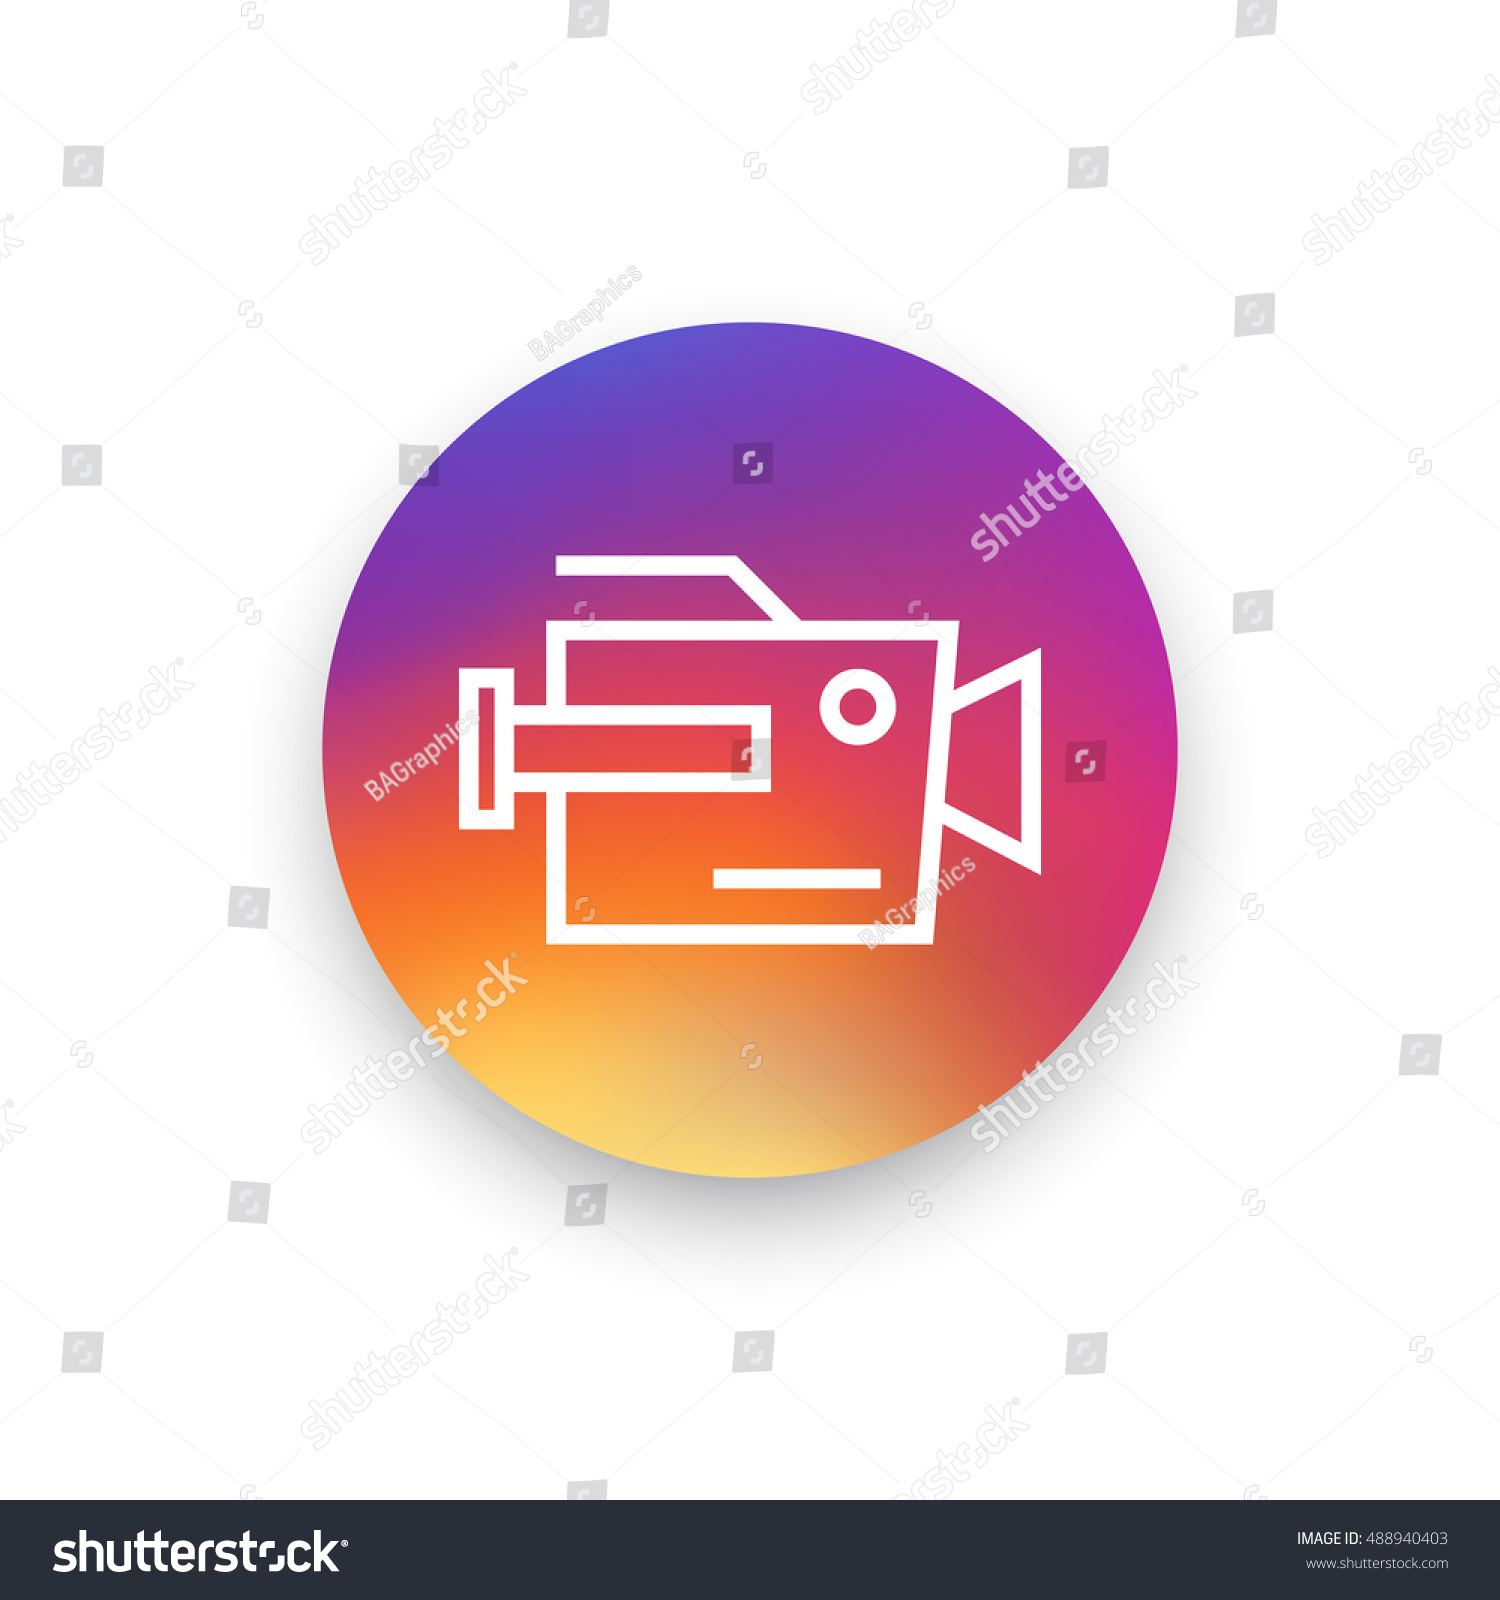 SVG of Camera icon vector, clip art. Also useful as logo, circle app icon, web element, symbol, graphic image, silhouette and illustration. Compatible with ai, cdr, jpg, png, svg, pdf, ico and eps. svg